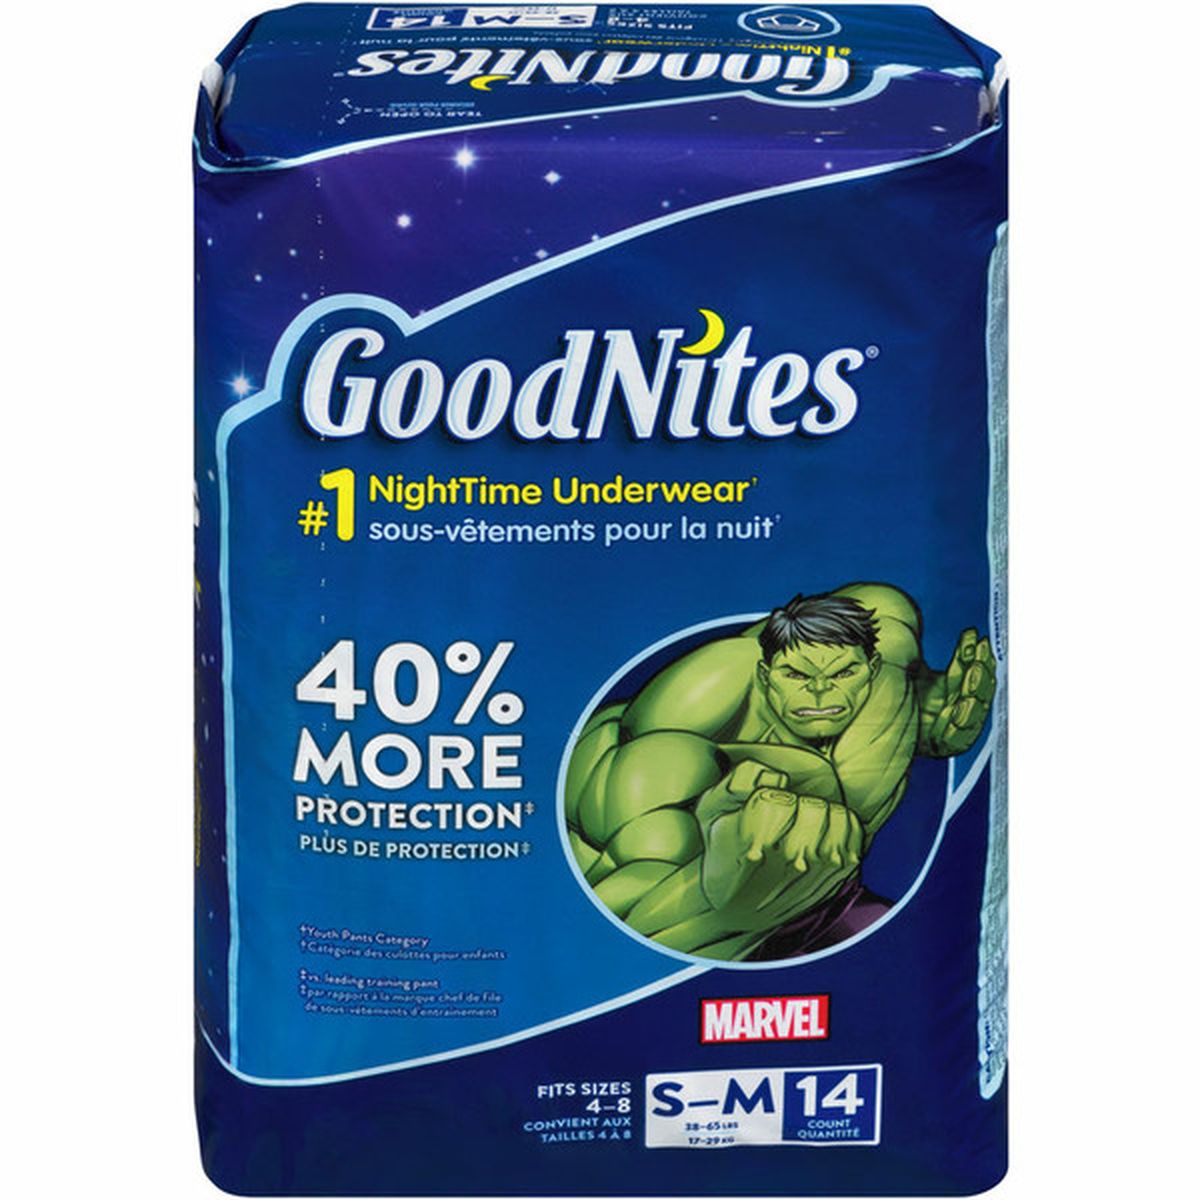 Goodnites Boys' Nighttime Bedwetting Underwear, Size S/M (43-68 lbs) (14  ct) Delivery or Pickup Near Me - Instacart